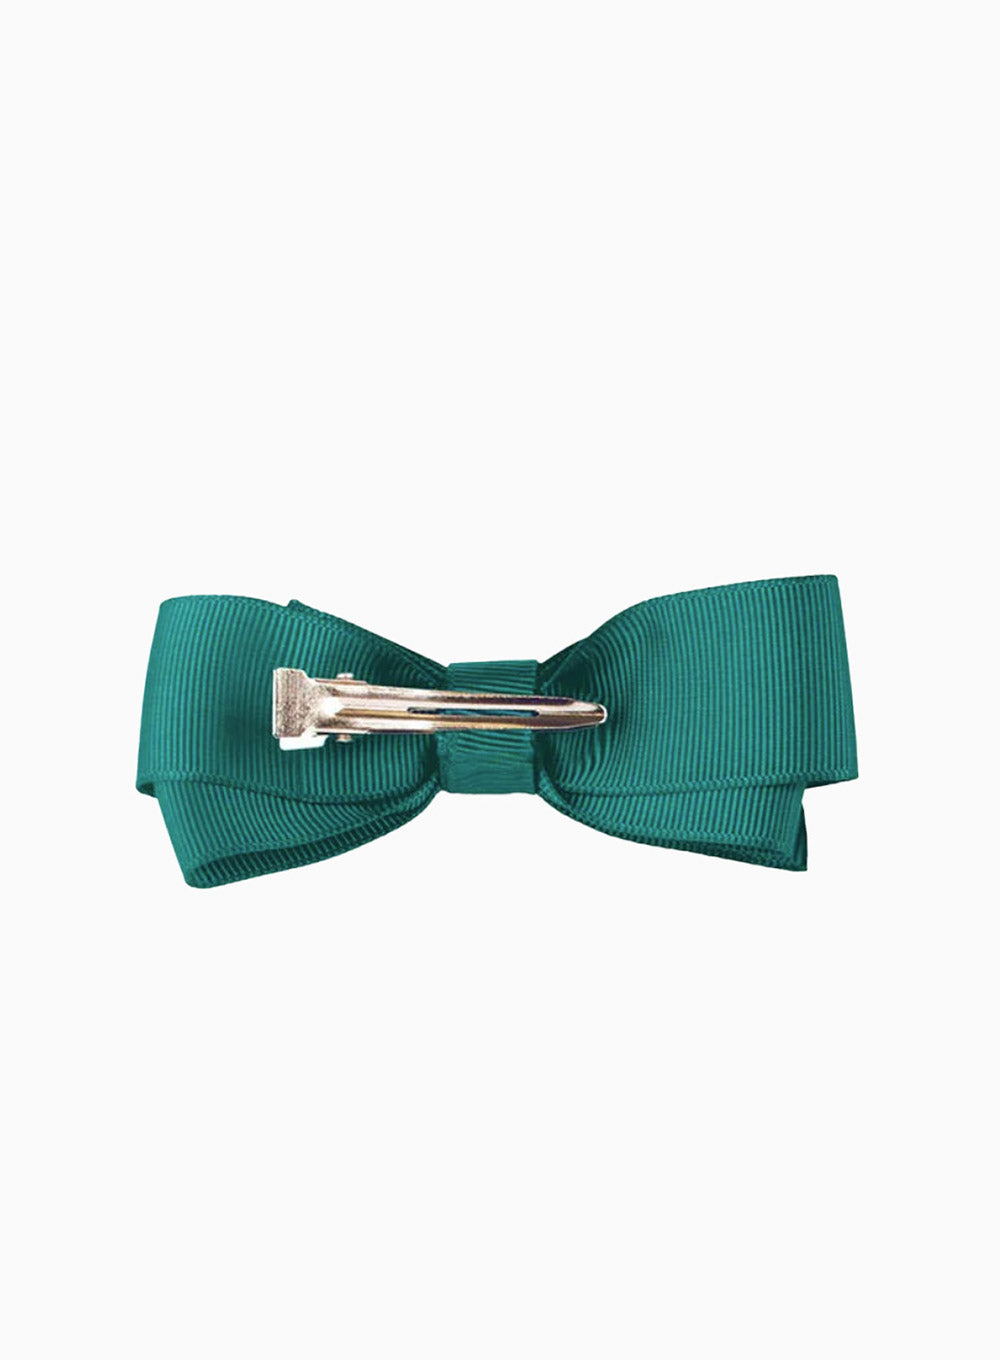 Large Bow Hair Clip in Teal